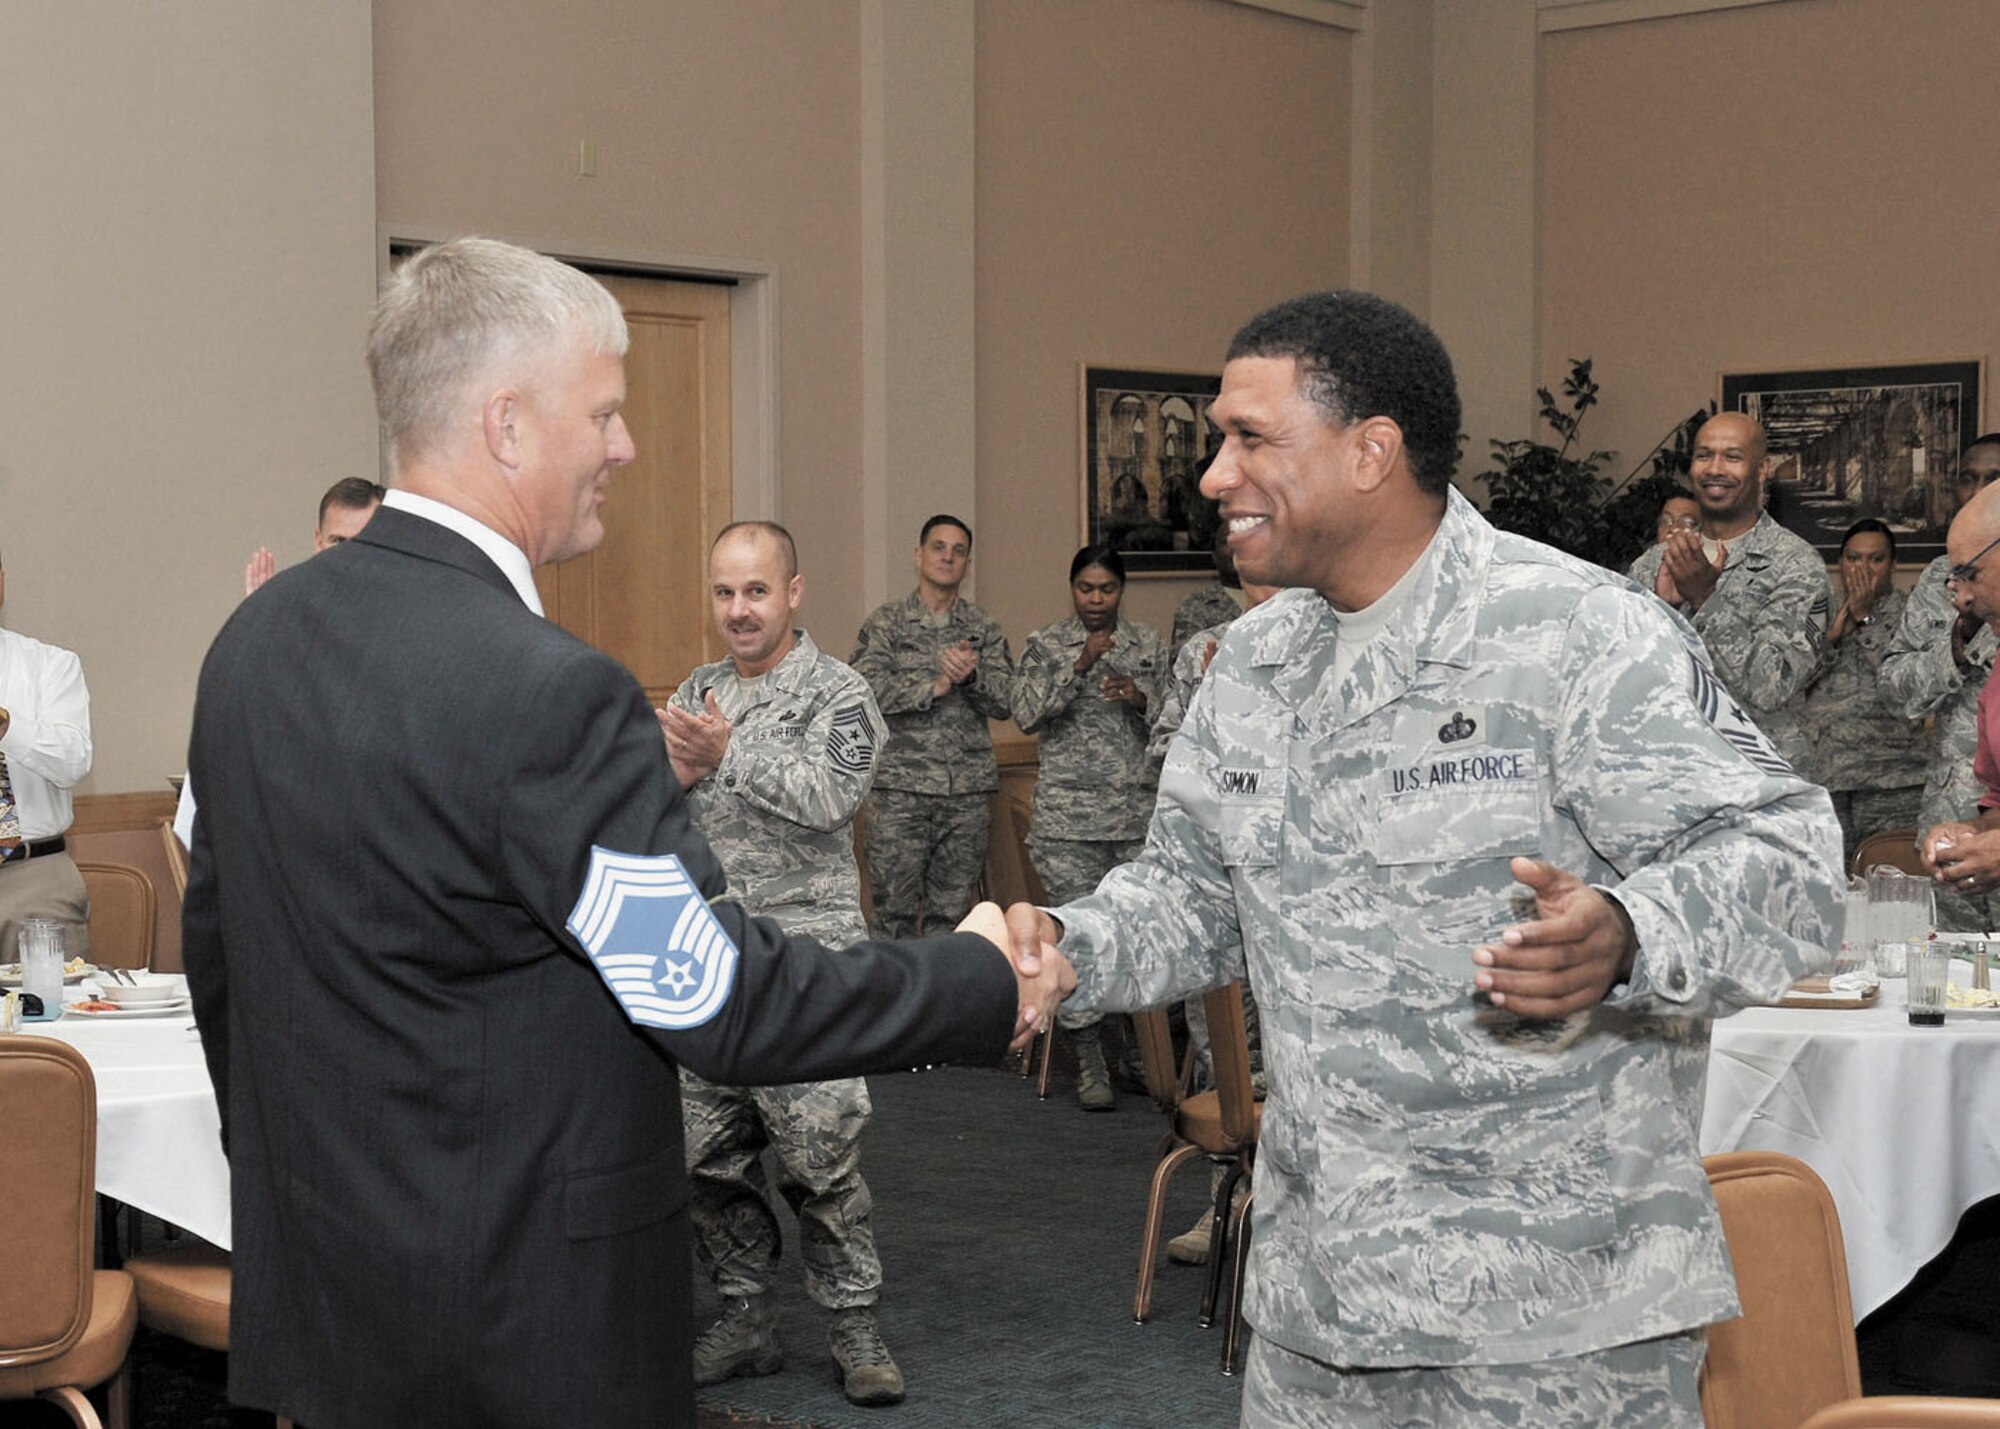 Col. William H. Mott V, former 37th Training Wing commander, is congratulated by Command Chief Master Sgt. Jay Simon soon after his selection ceremony as an honorary chief master sergeant. Simon was Mott’s top enlisted advisor during his tenure as commander of the 37 TRW. (U.S. Air Force photo/Alan Boedeker)